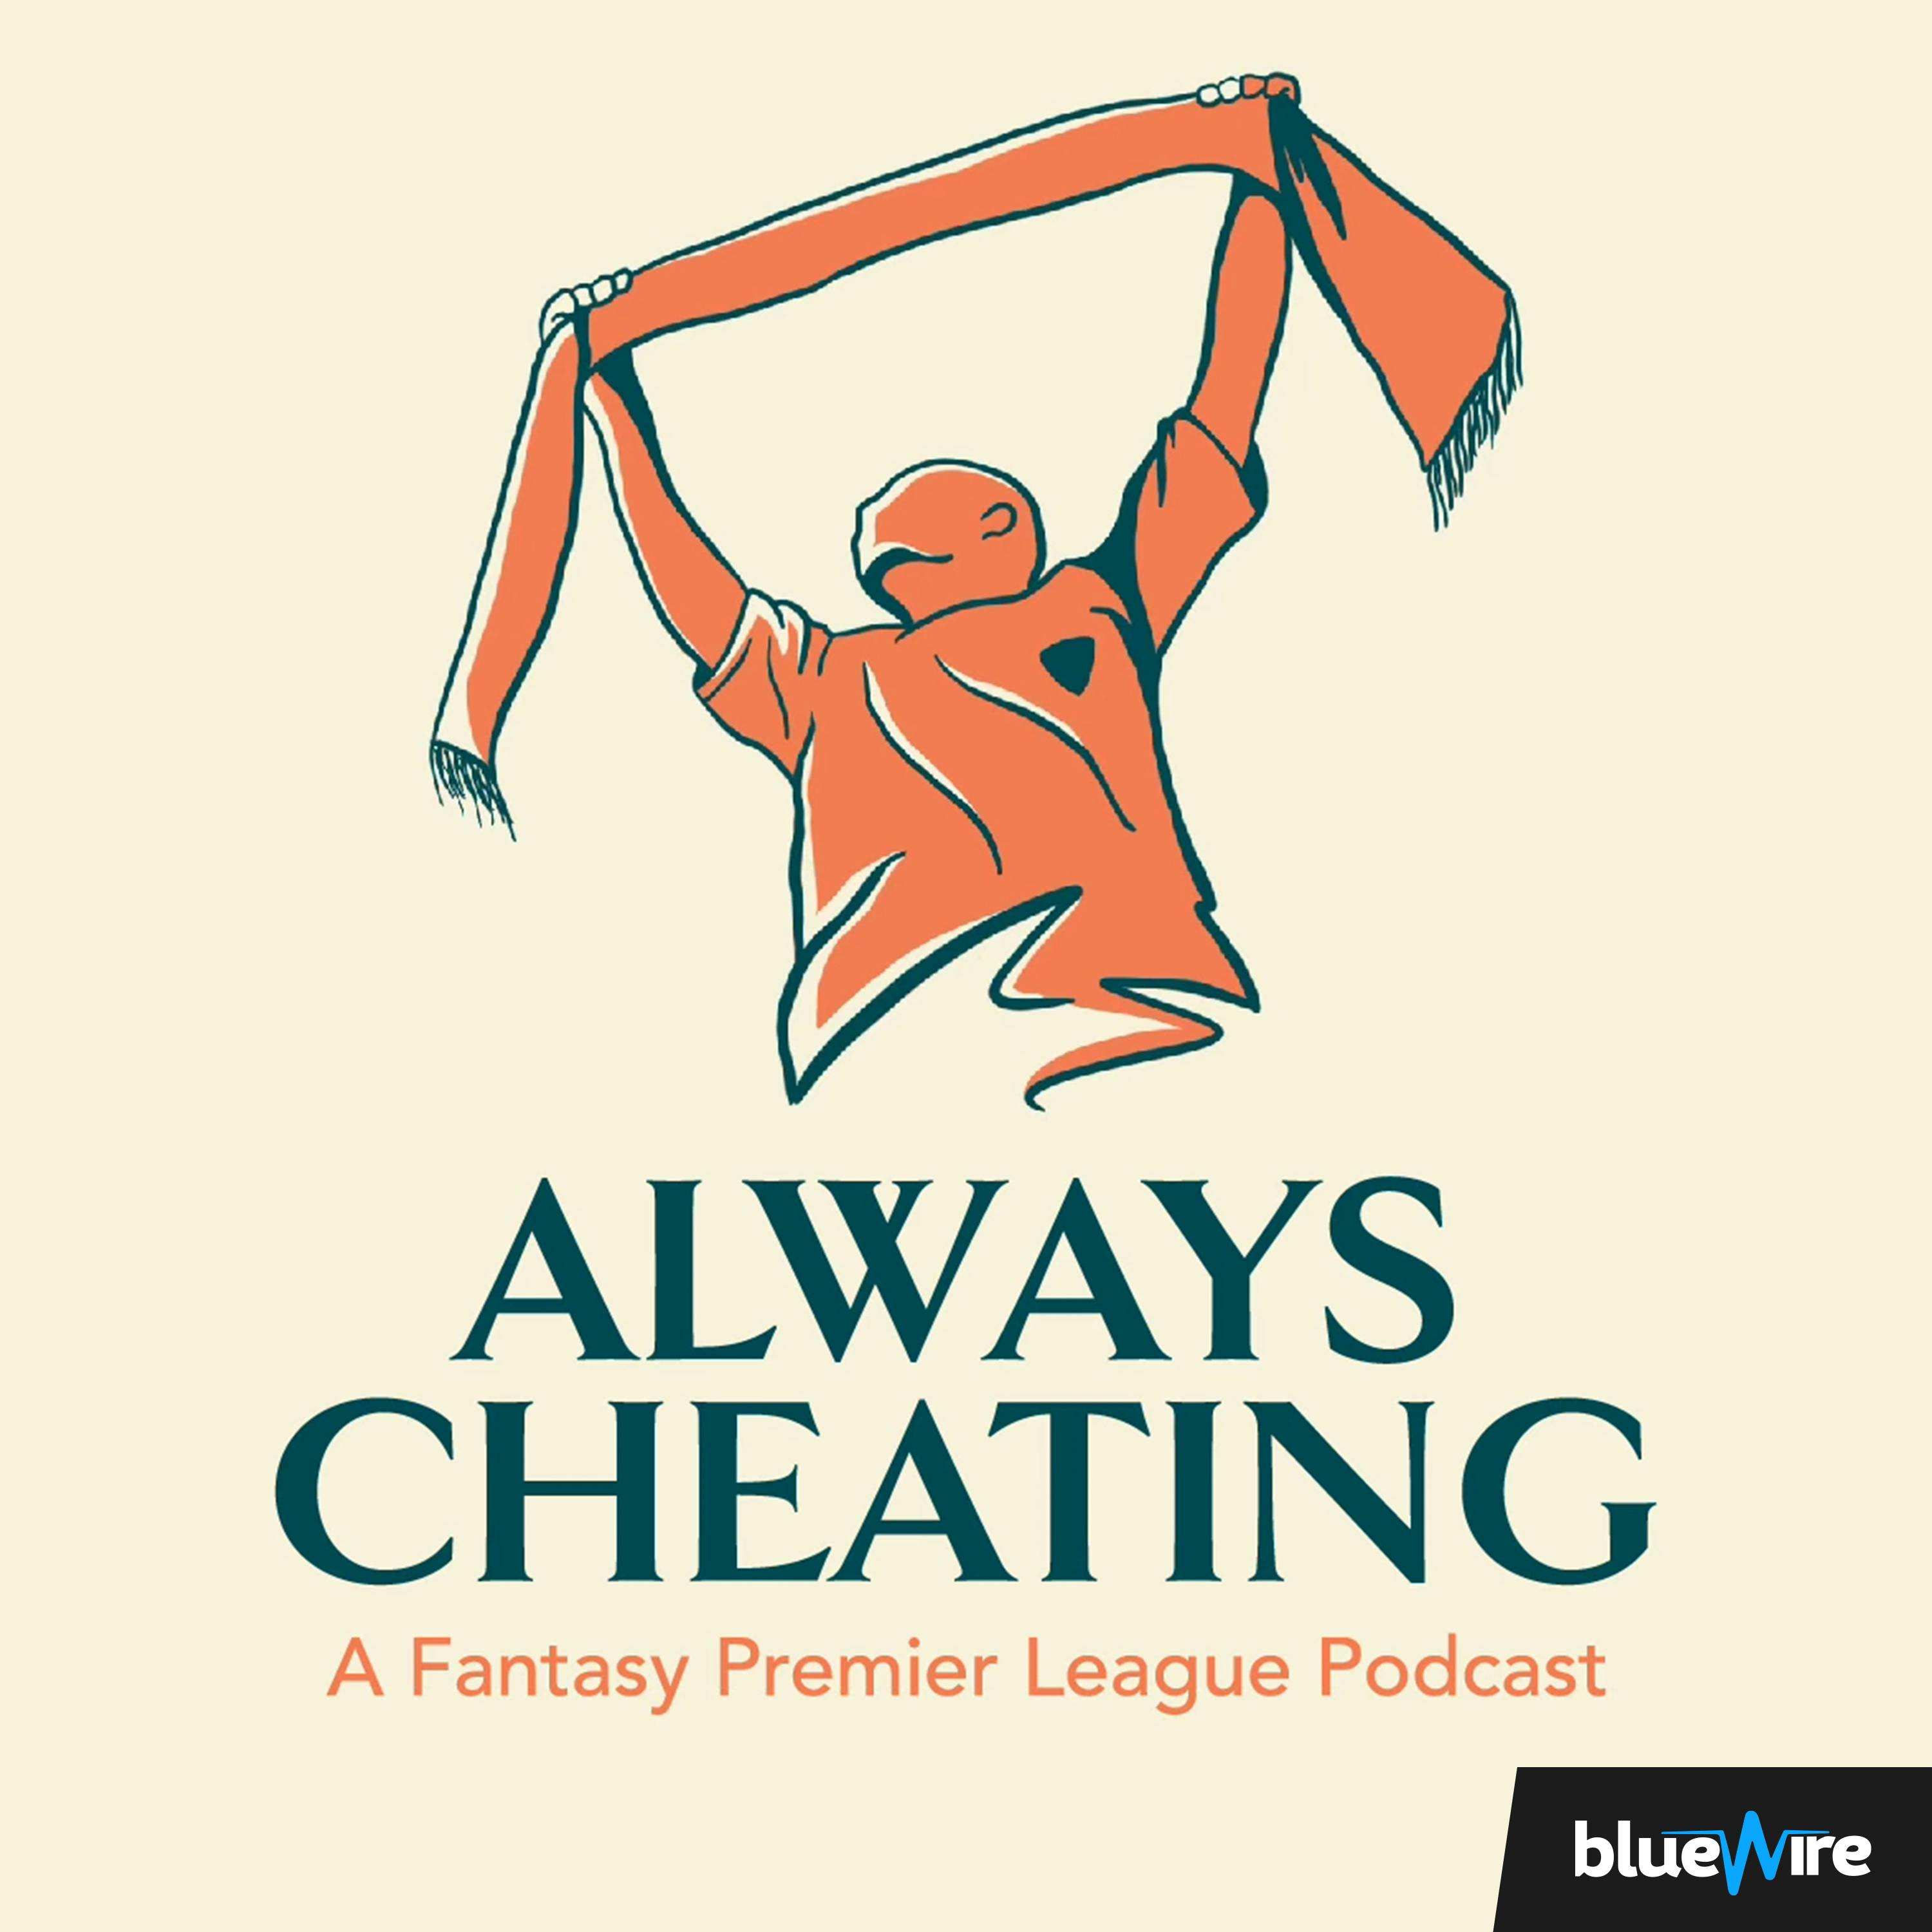 Always Cheating: A Fantasy Premier League Podcast (FPL) podcast show image